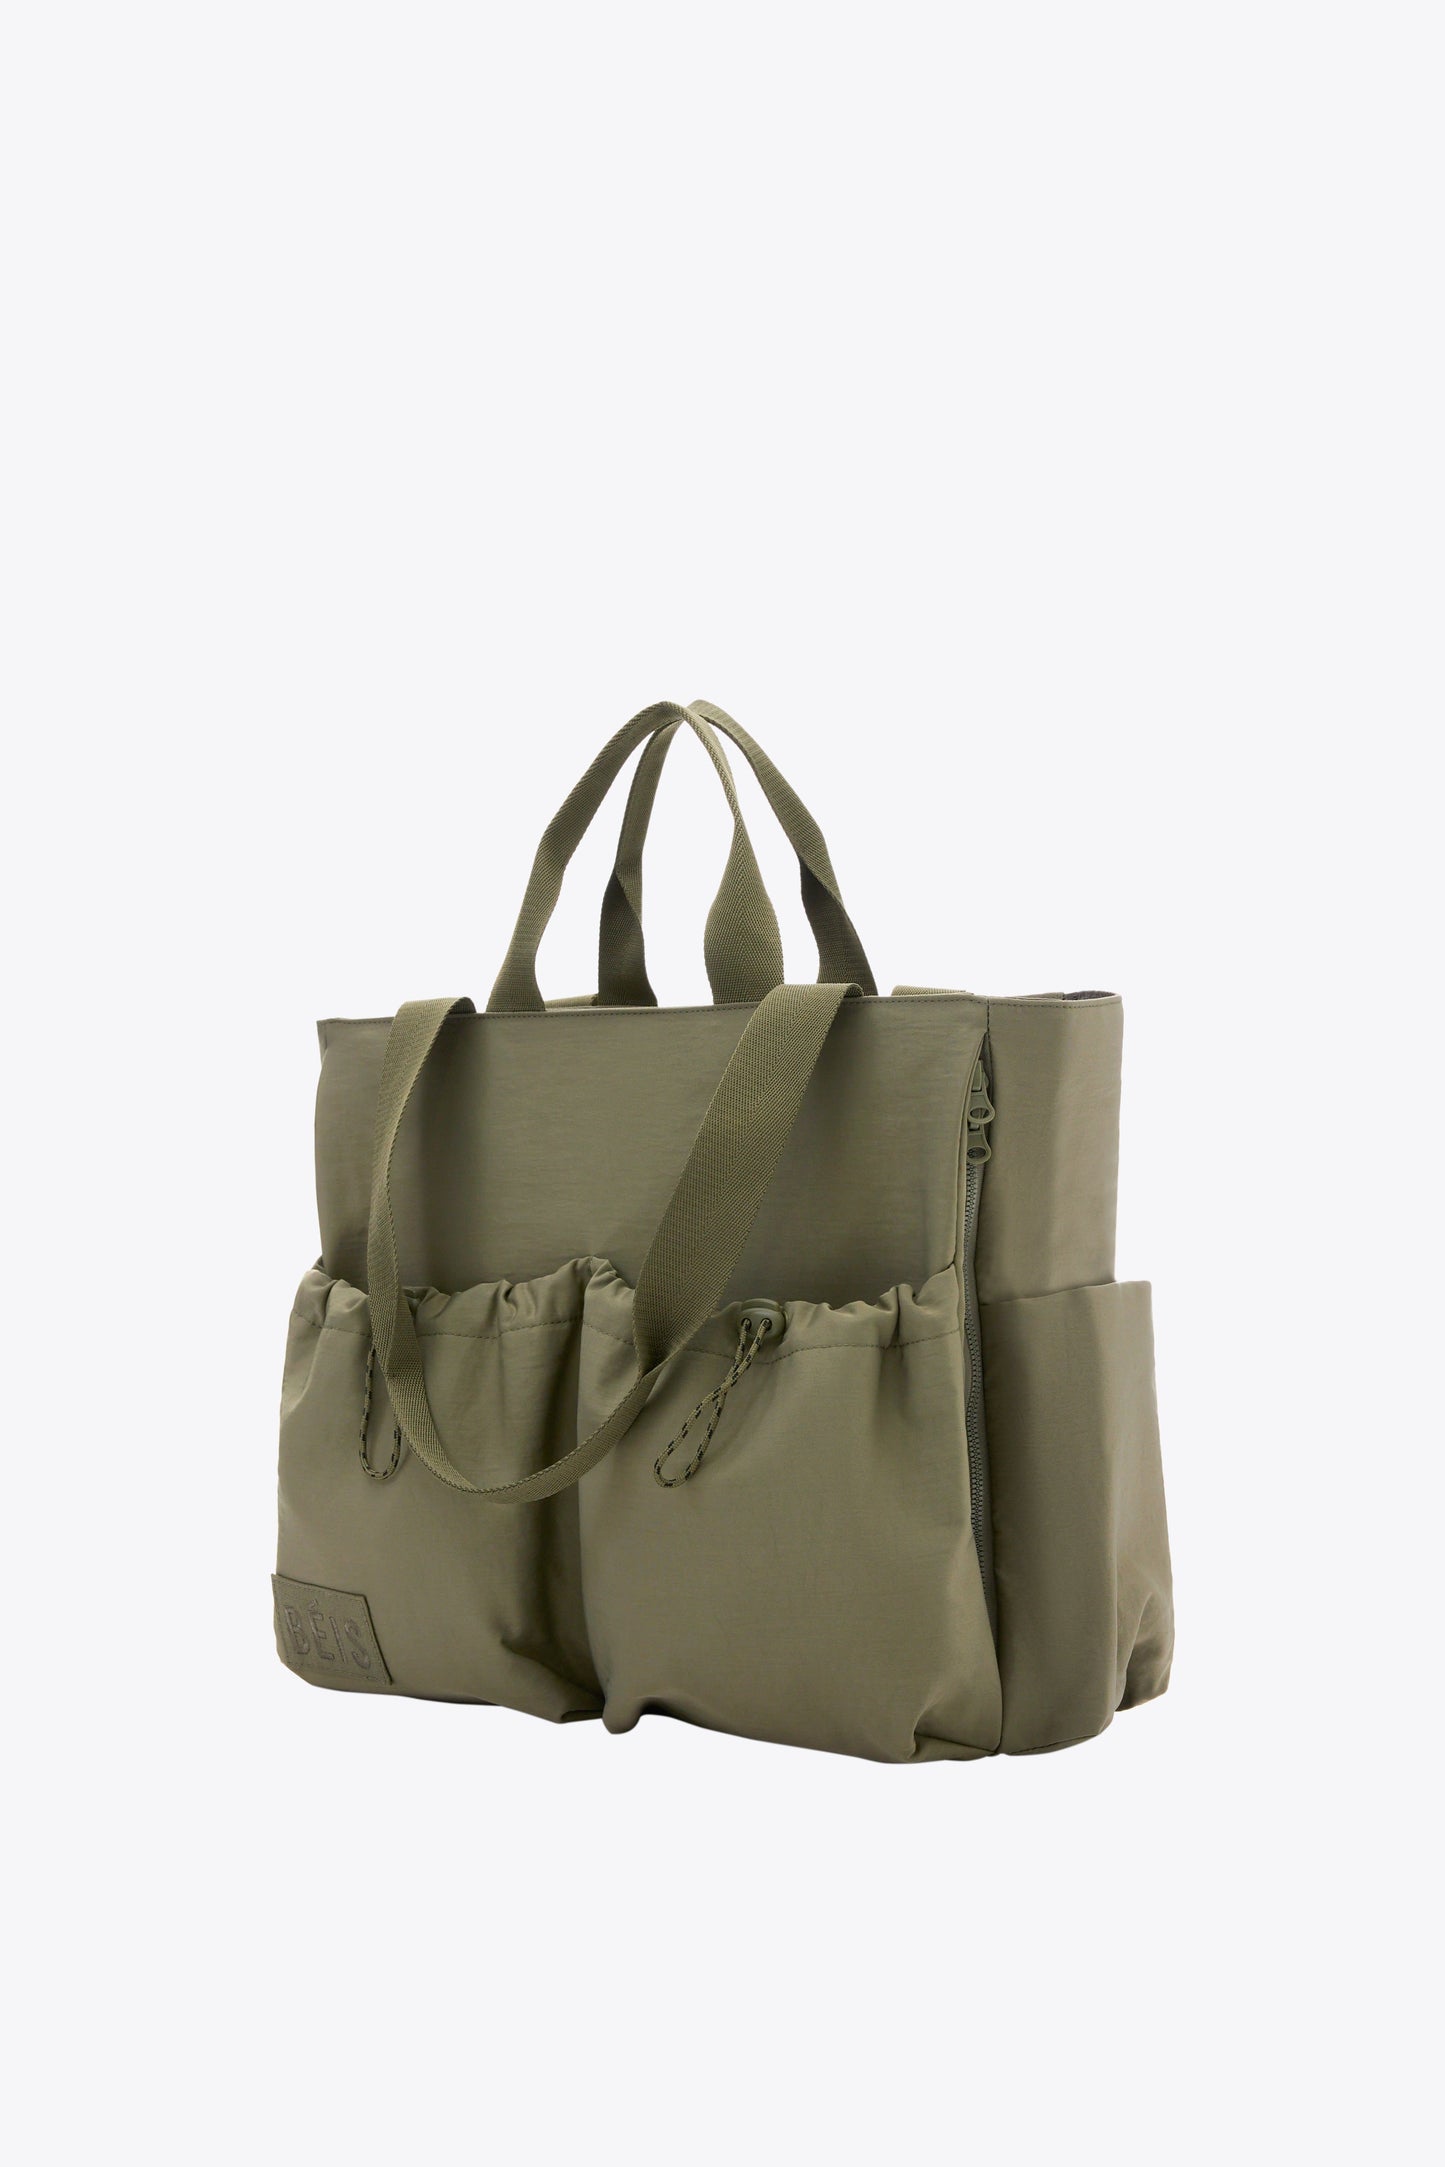 The Sport Carryall in Olive